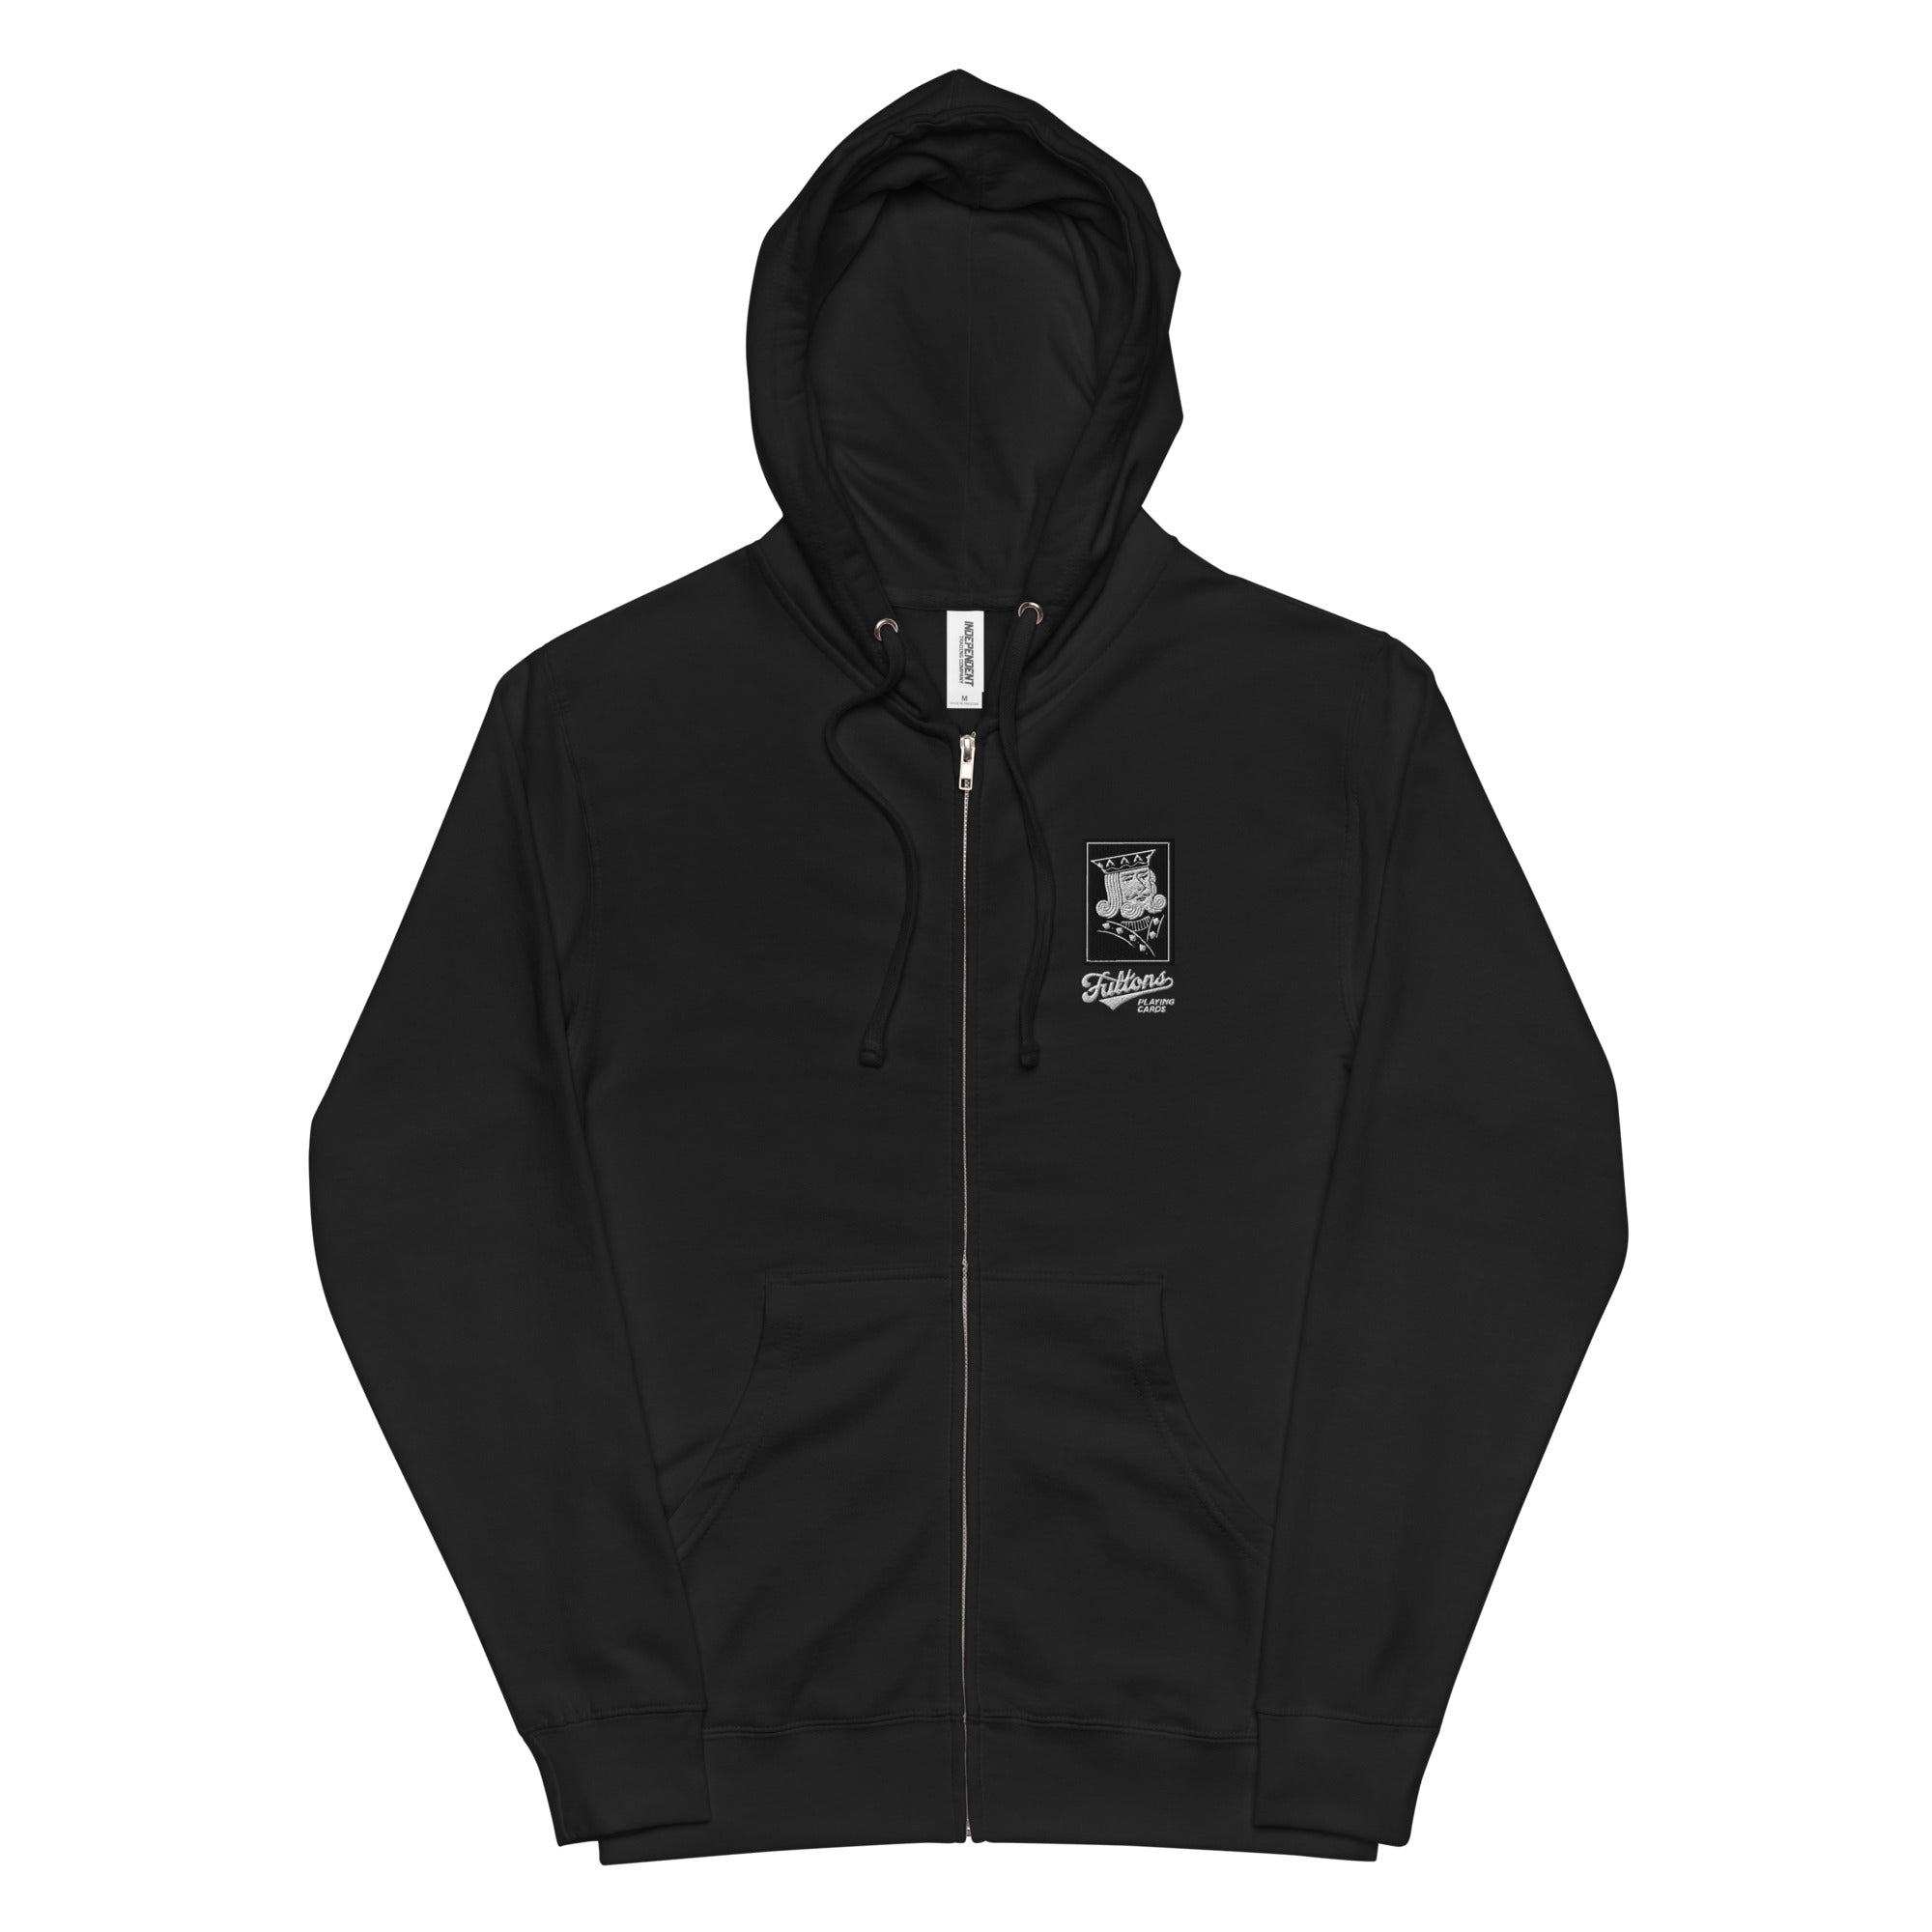 Fulton's King Emblem Embroidered Zip Up Hoodie